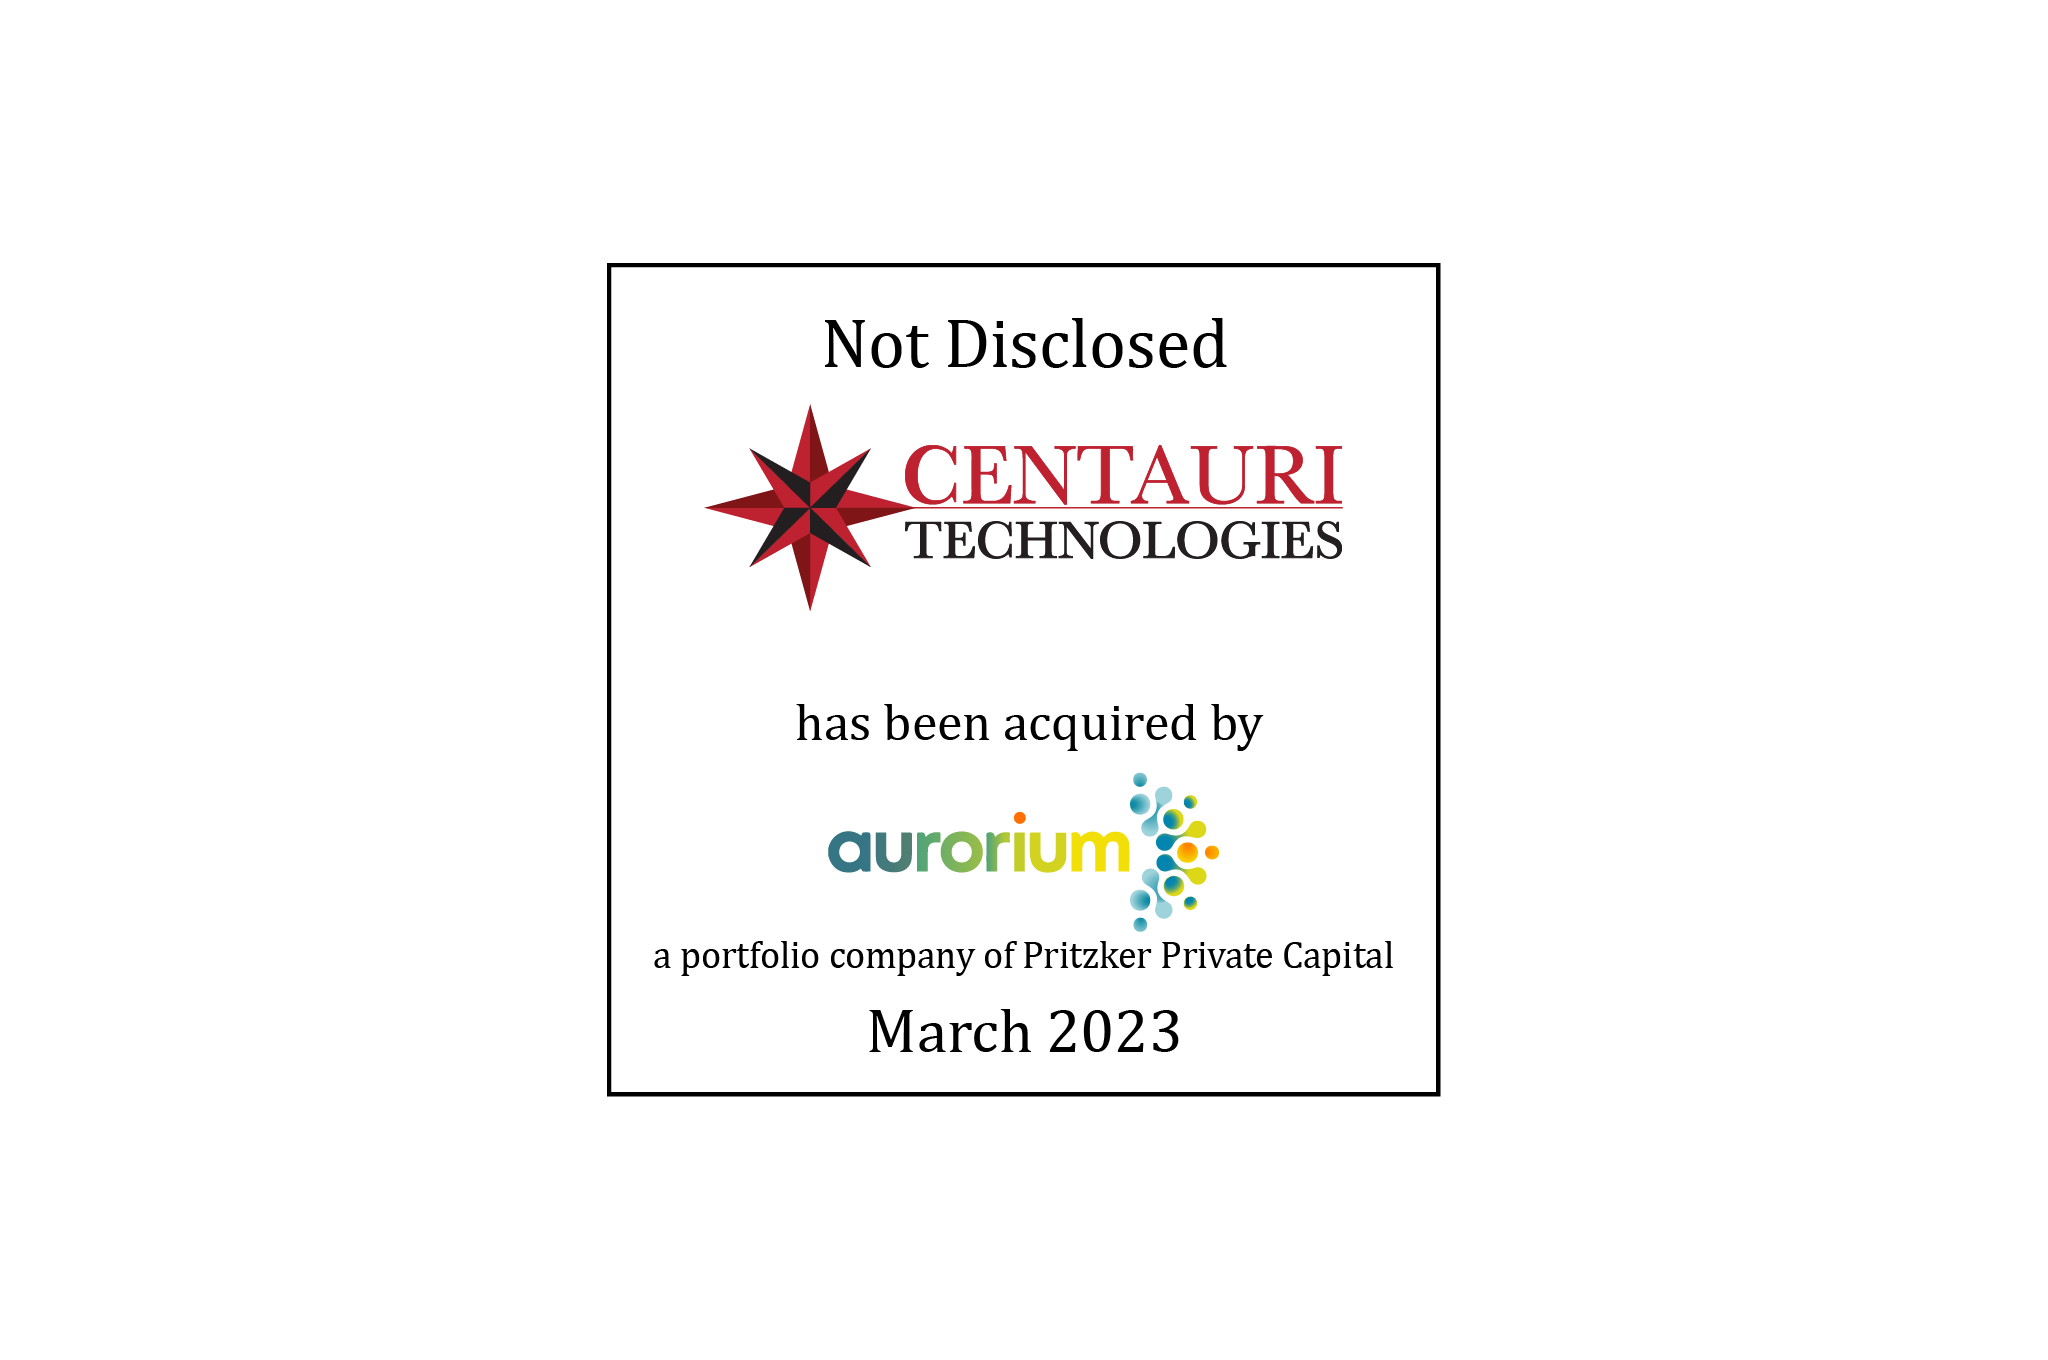 Not Disclosed | CENTAURI Technologies (logo) Has Been Acquired by Aurorium (logo) | March 2023